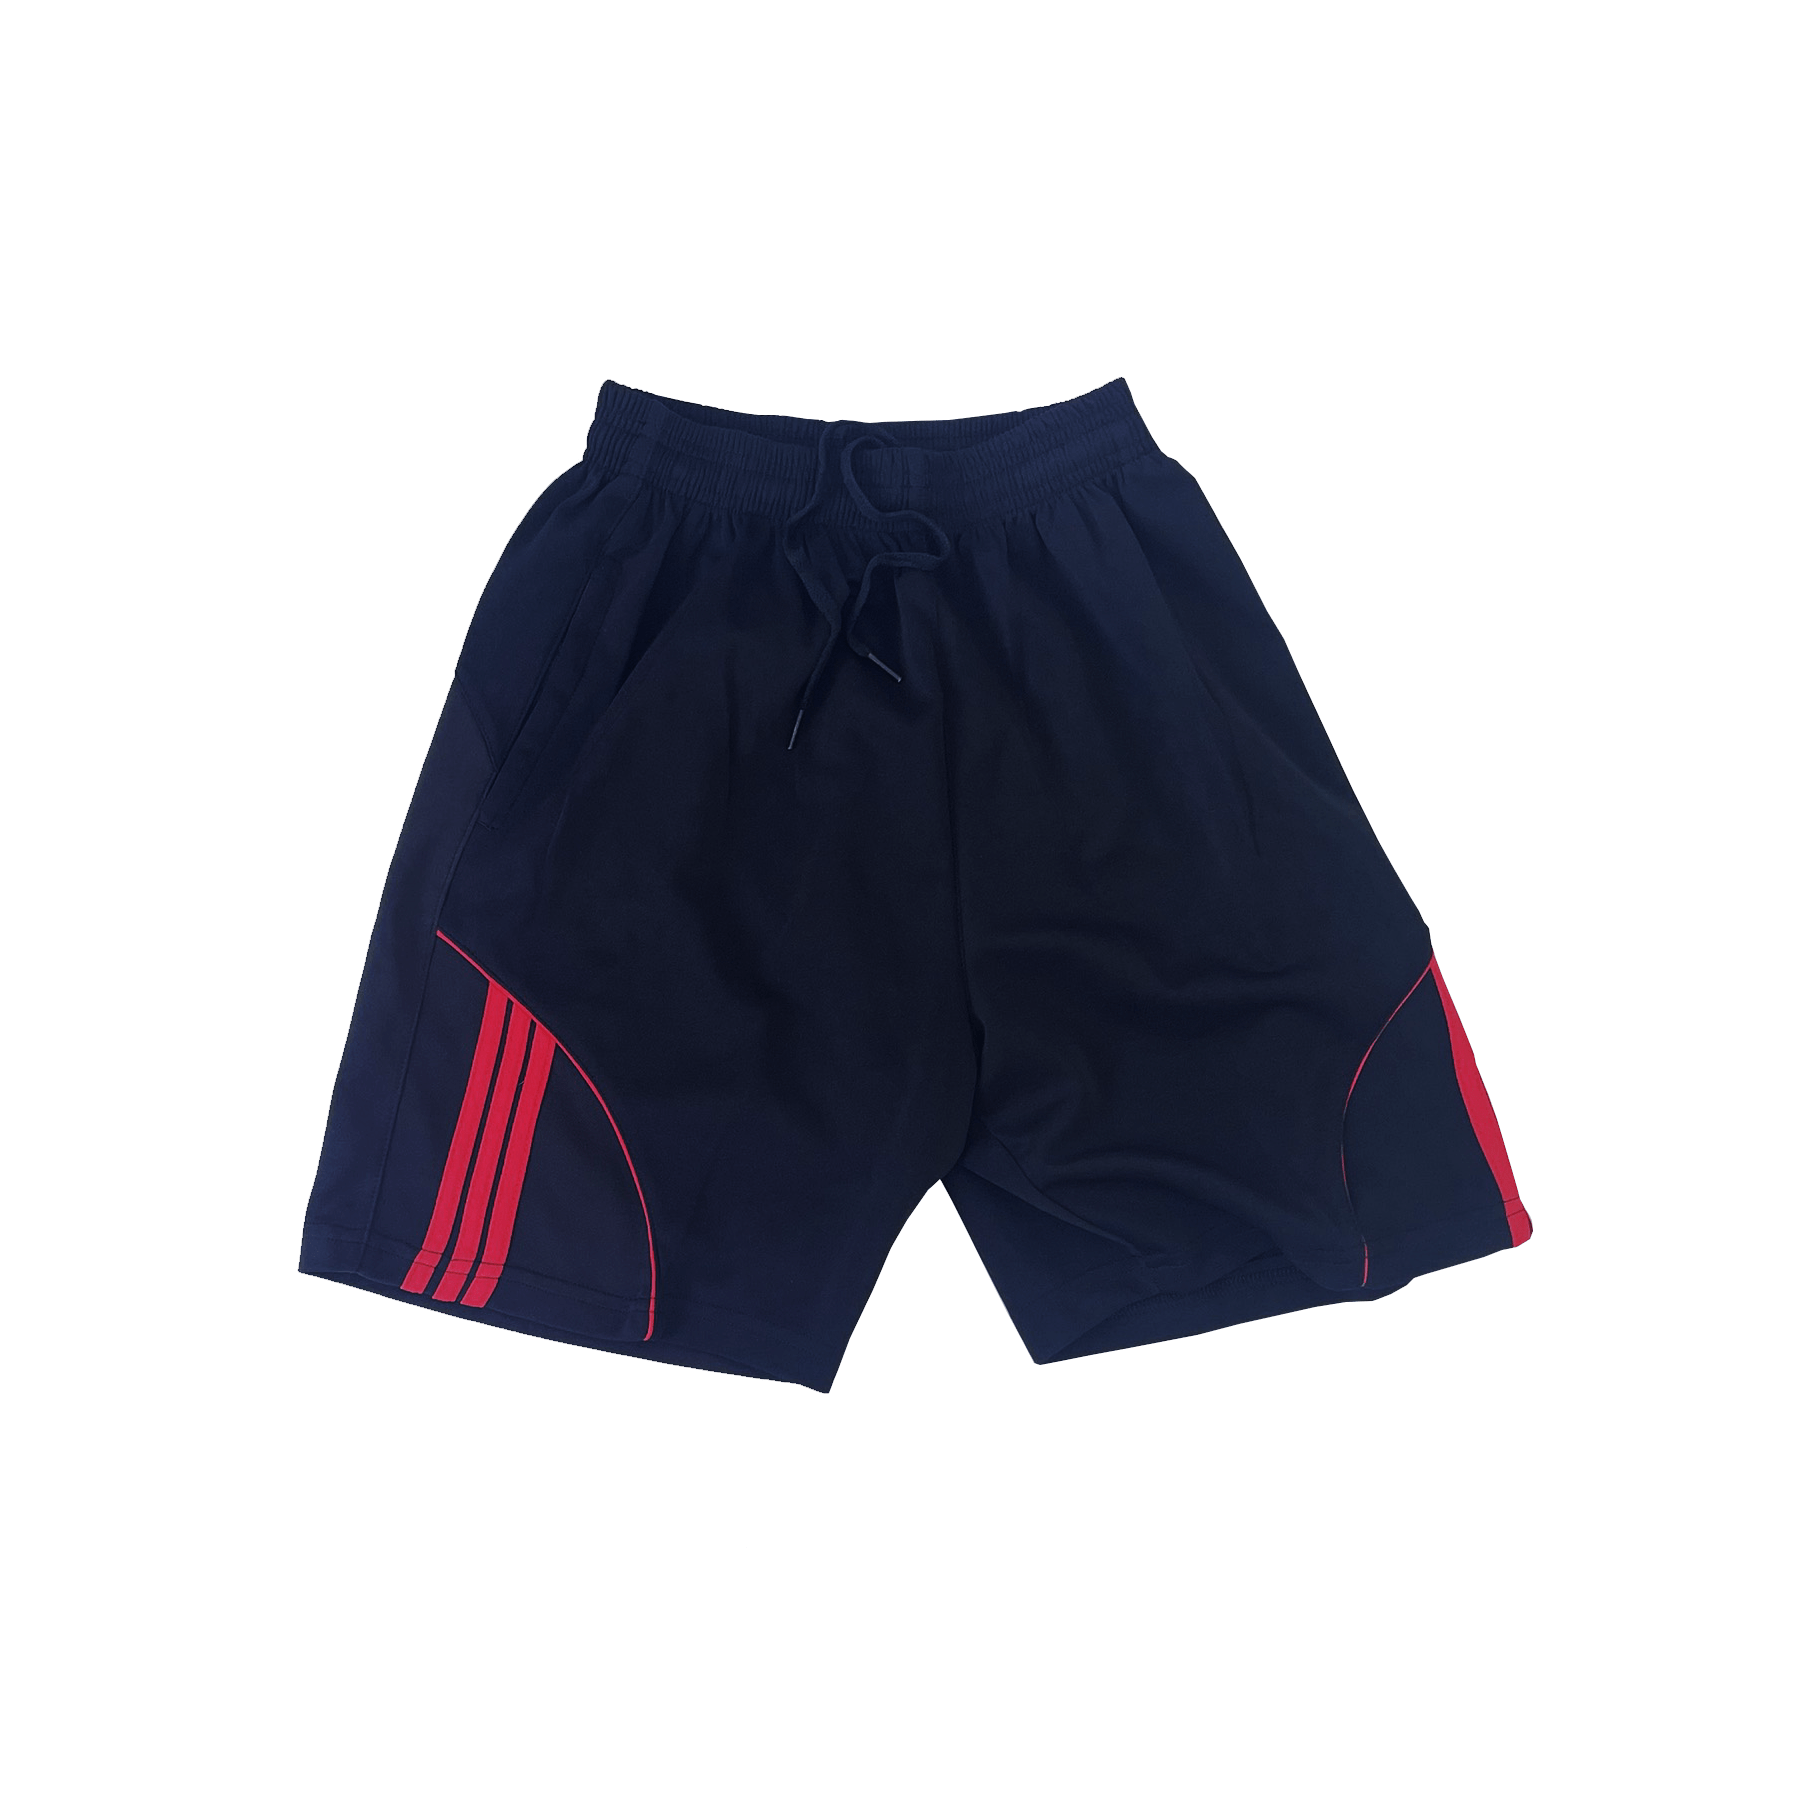  Cheap Price Men Short Pants High Quality Ready To Ship Odm Each One In Opp Bag Made In Vietnam Manufacturer 5